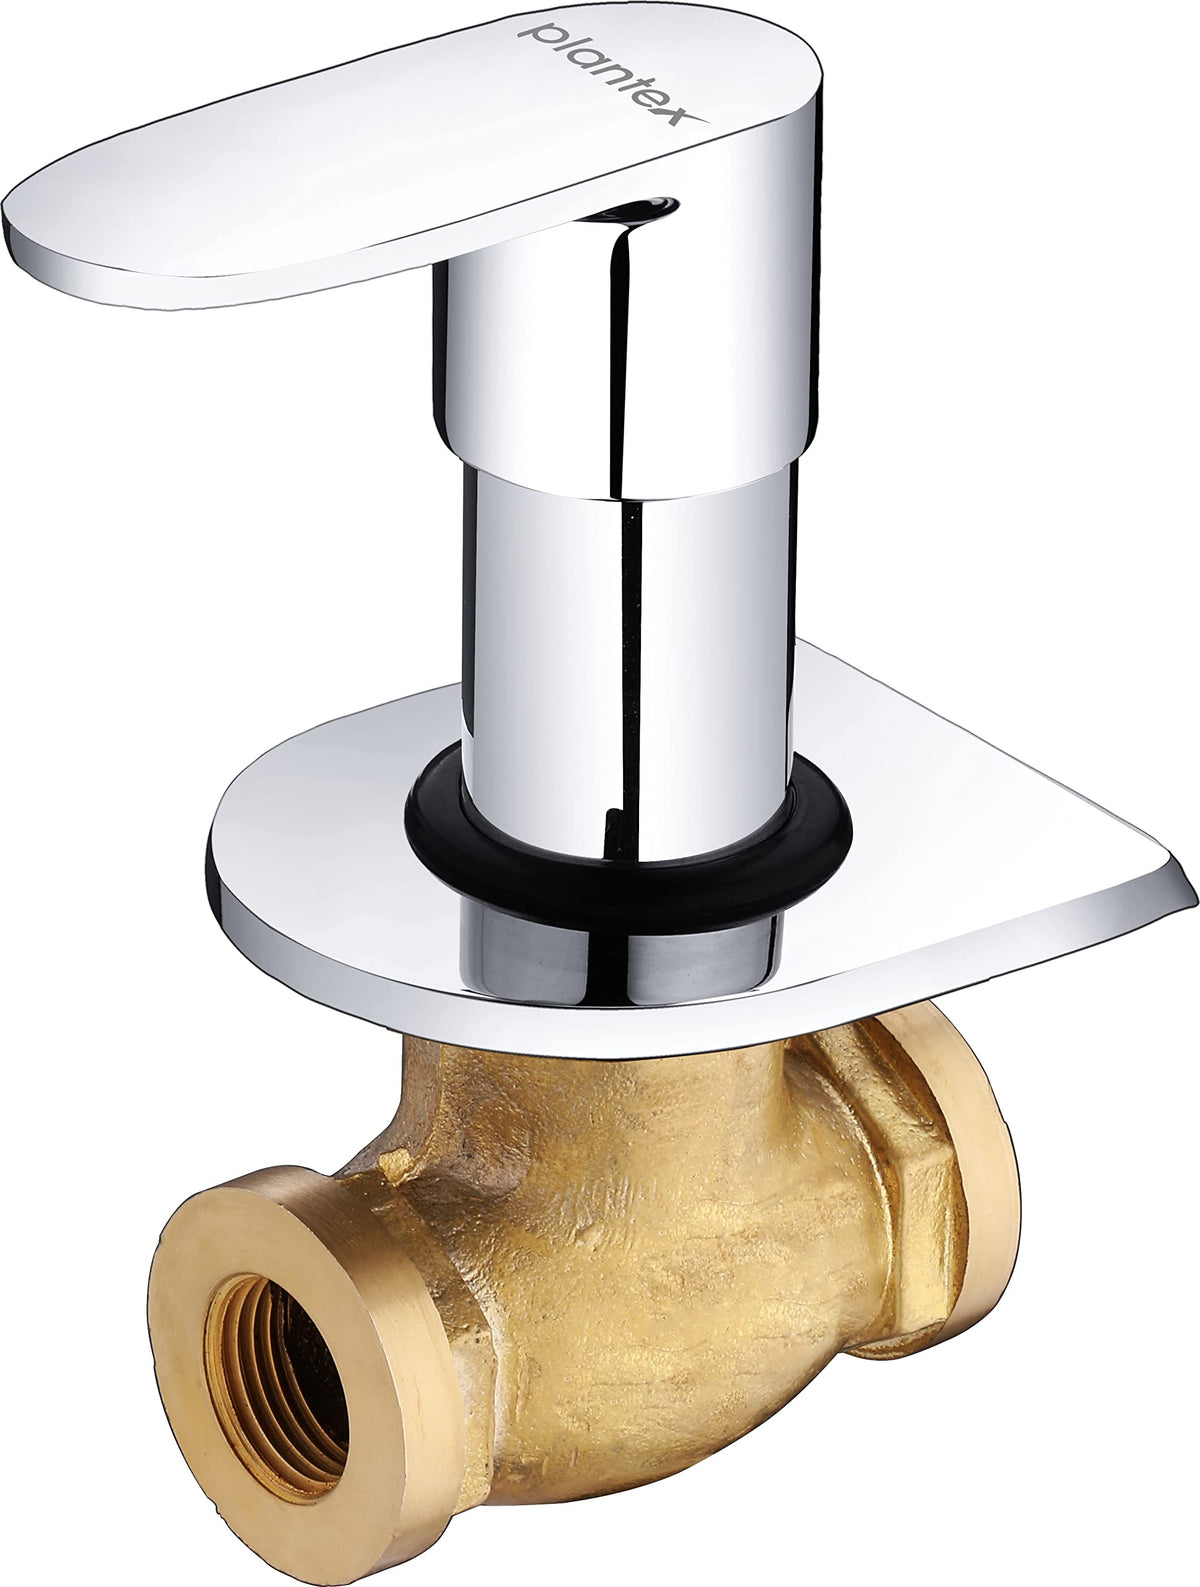 Plantex Pure Brass ORN-206 Angular Concealed Stop Cock/Concealed Stop Valve Tap For Bathroom With Teflon Tape & Adjustable Brass Wall Flange - 15mm (Mirror-Chrome Finish)